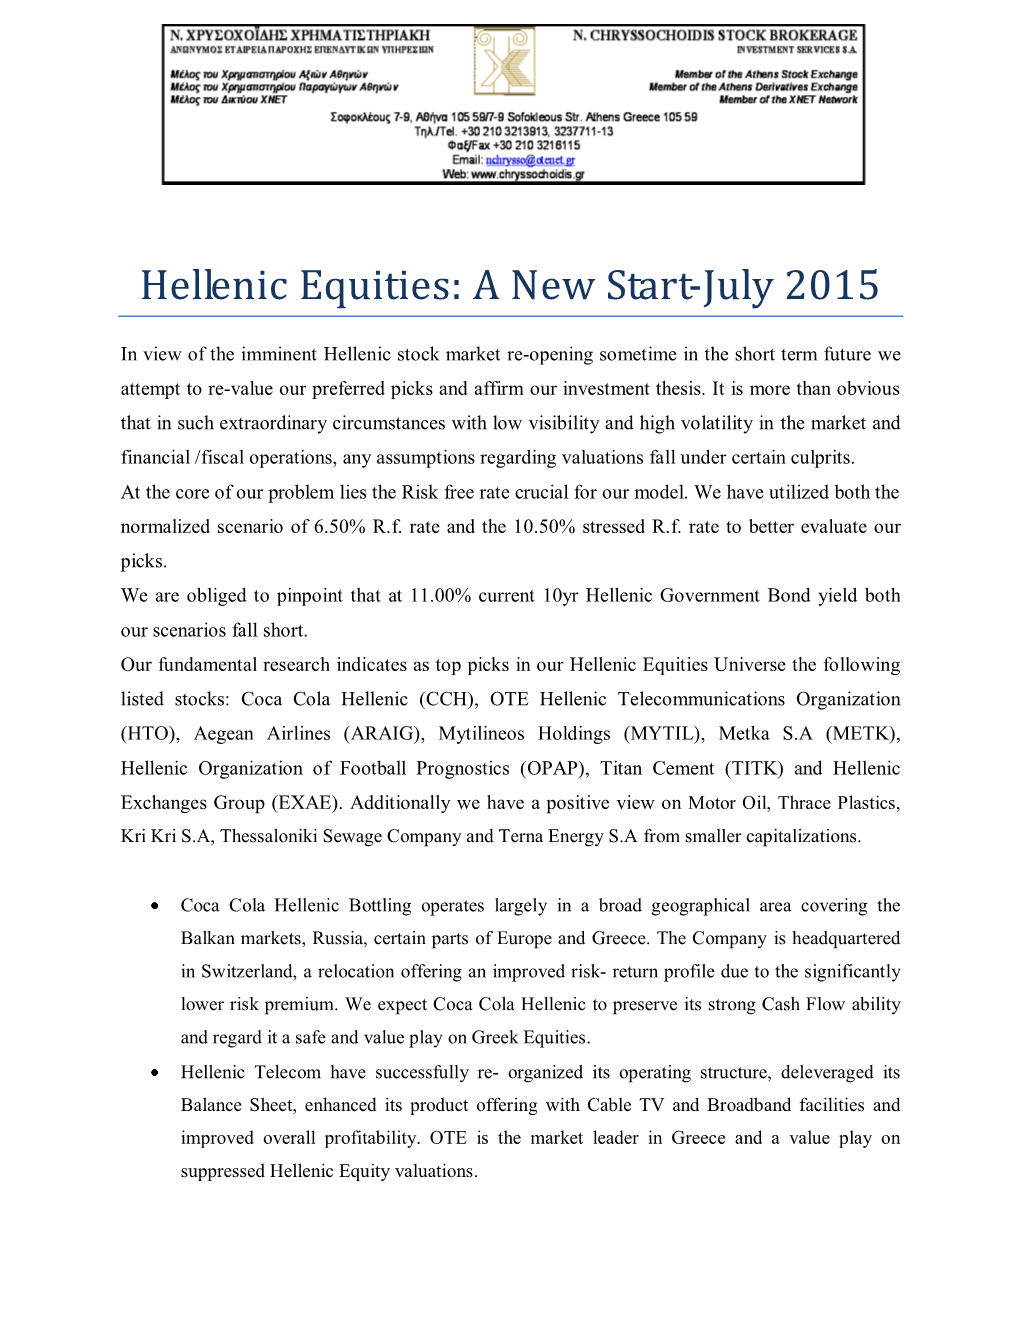 Hellenic Equities: a New Start-July 2015